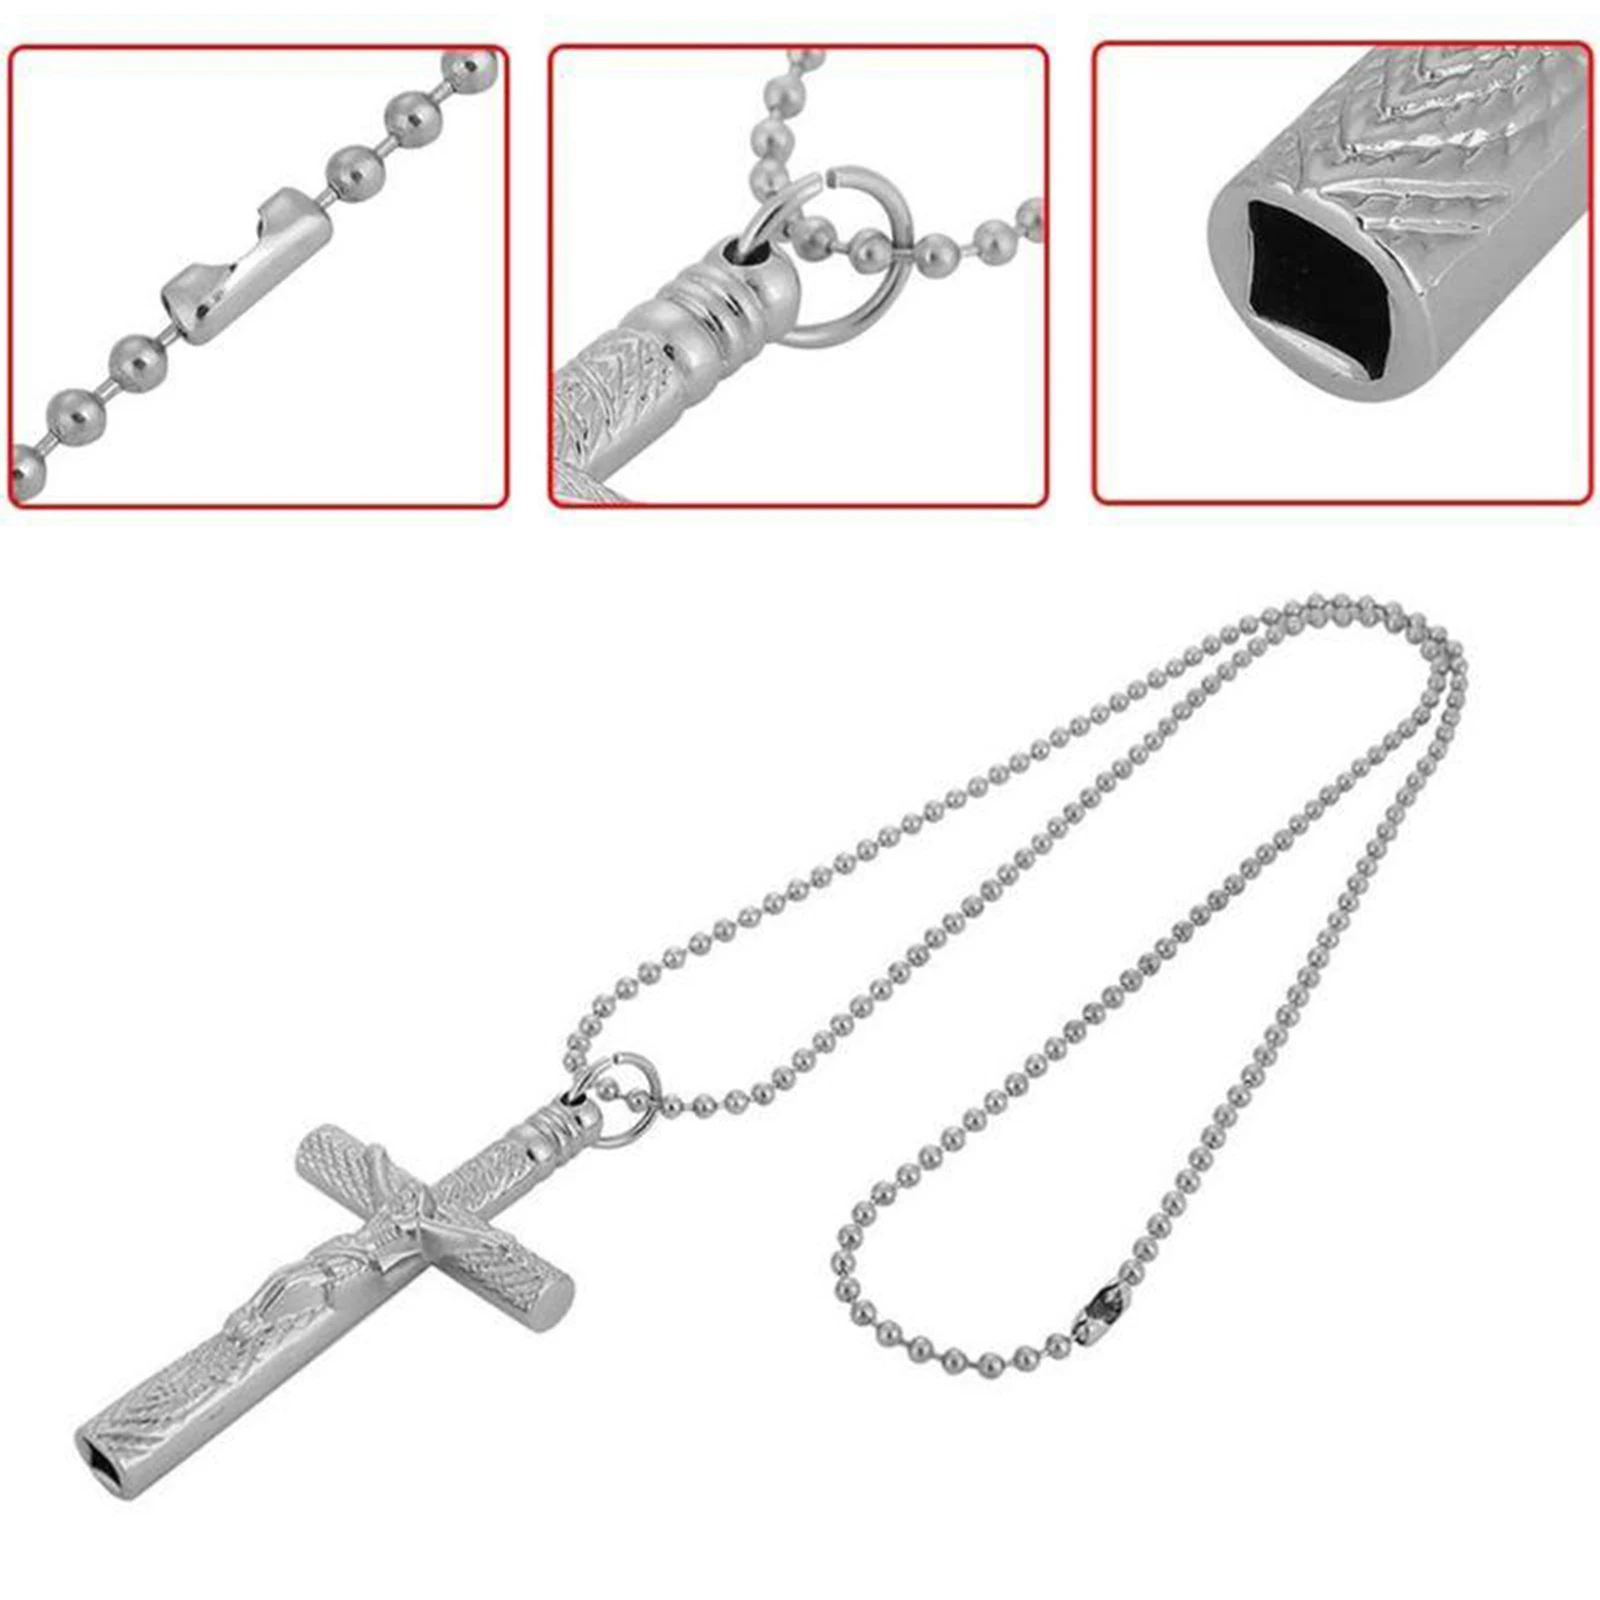 Drum Tuning Key Necklace Drum Tuning Wrench Cross Drum Key w/ Chain Necklace